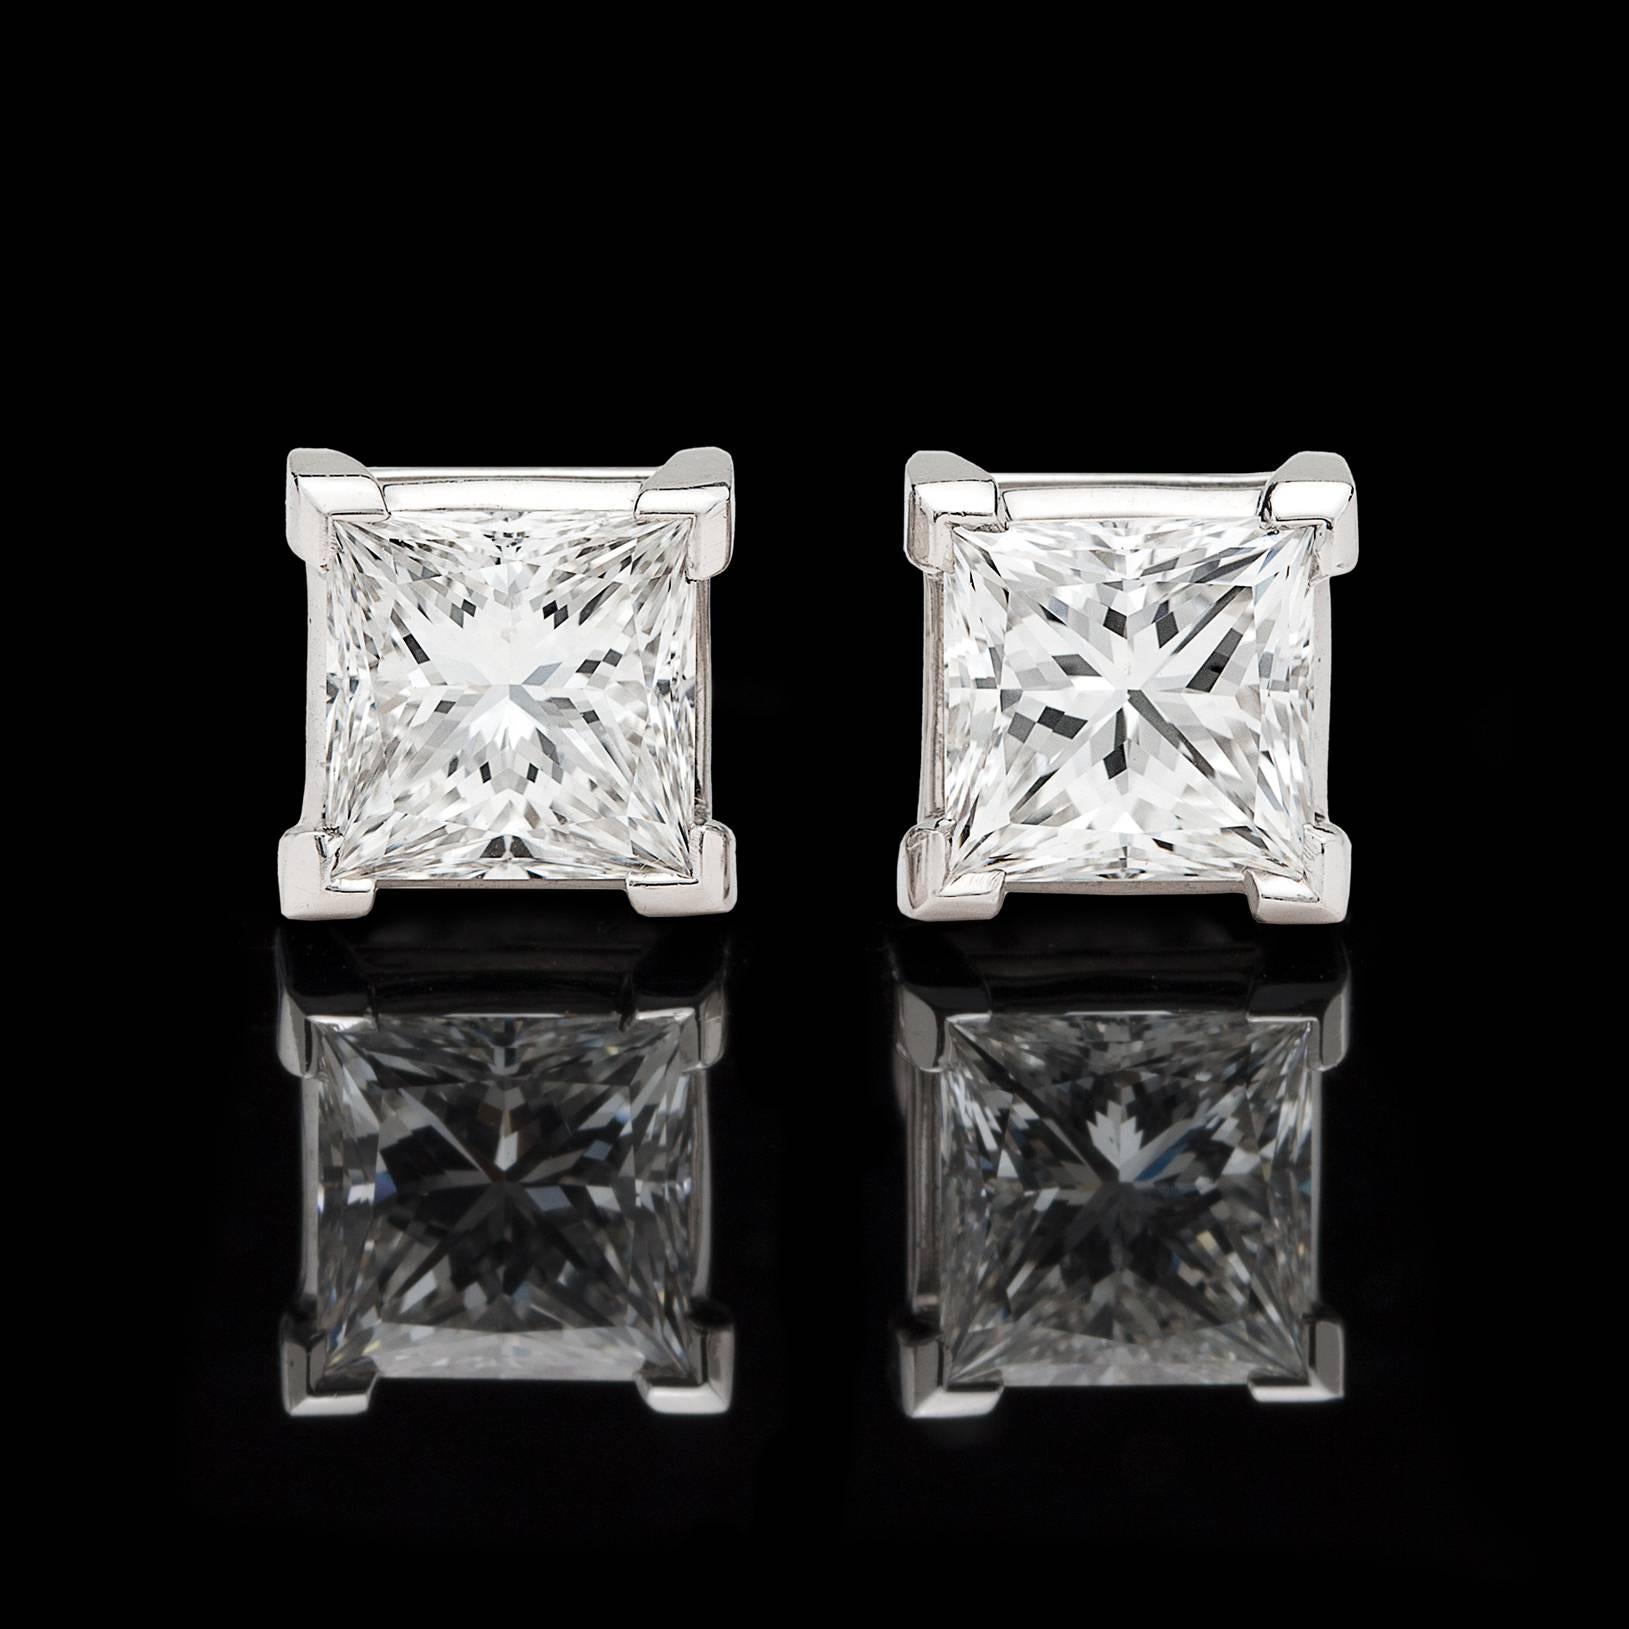 The perfect pair of earrings that can be worn day or night! At 2.54 carats total weight (1.21ct & 1.33ct) they are significant in size, and at F color and VS1 clarity, they are of exceptional quality. With incredible sparkle and fire, these two